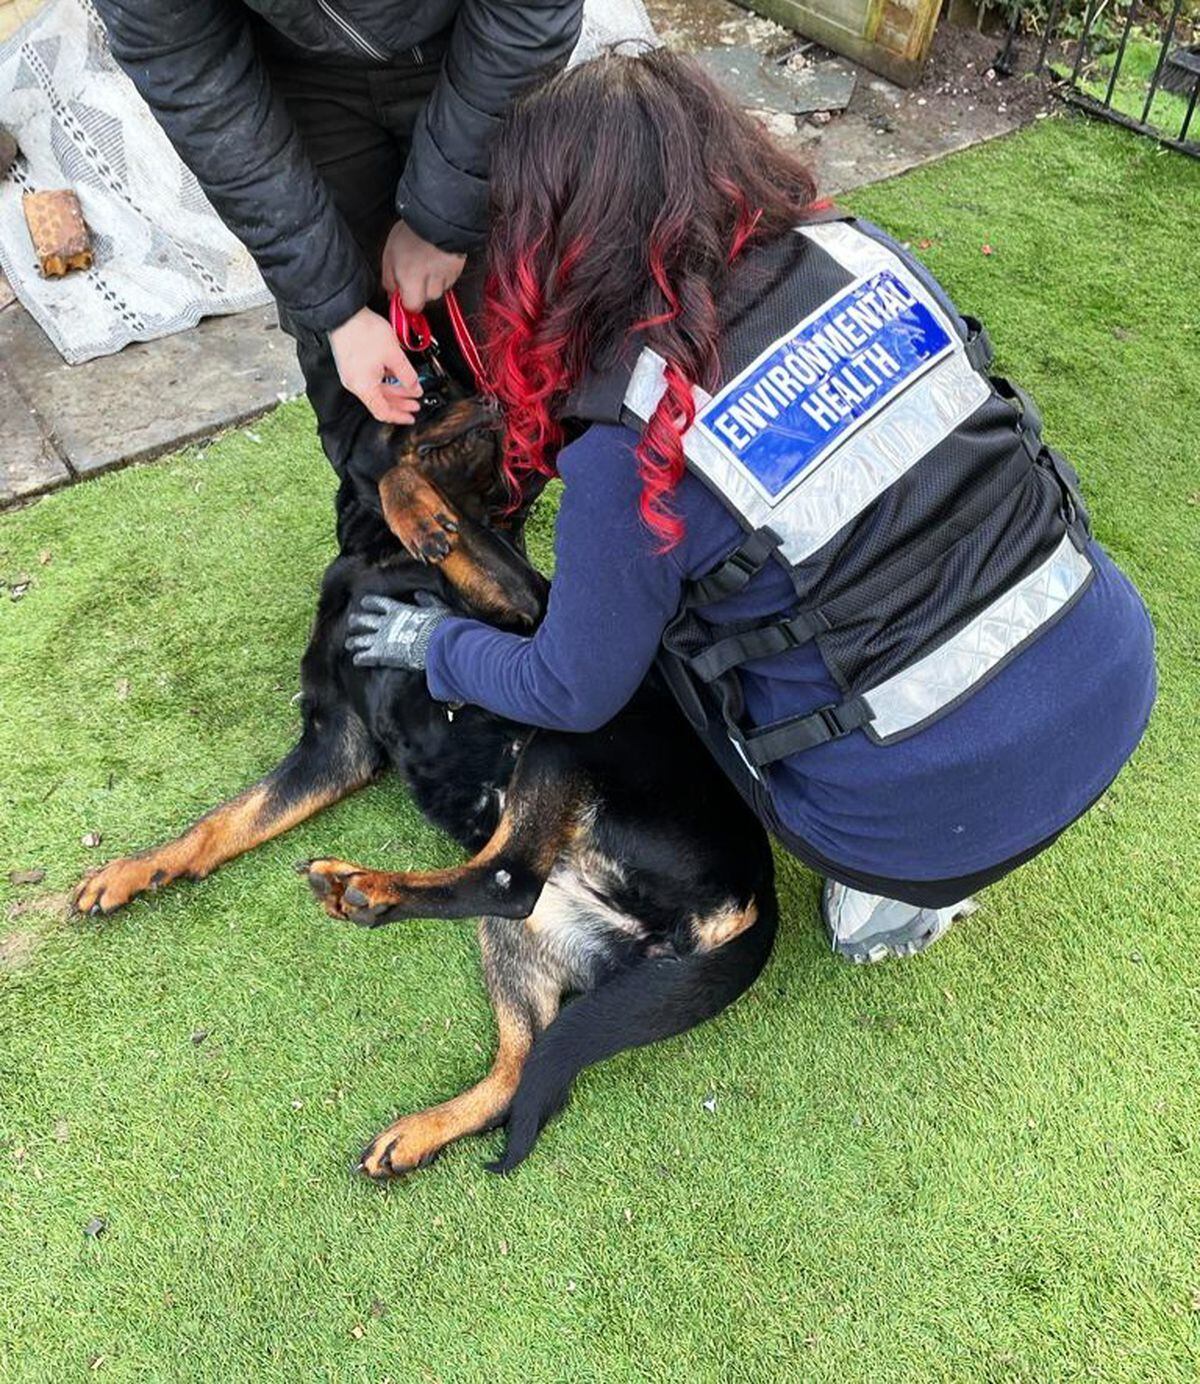 The Rottweilers have now been surrendered to Cannock Chase Council